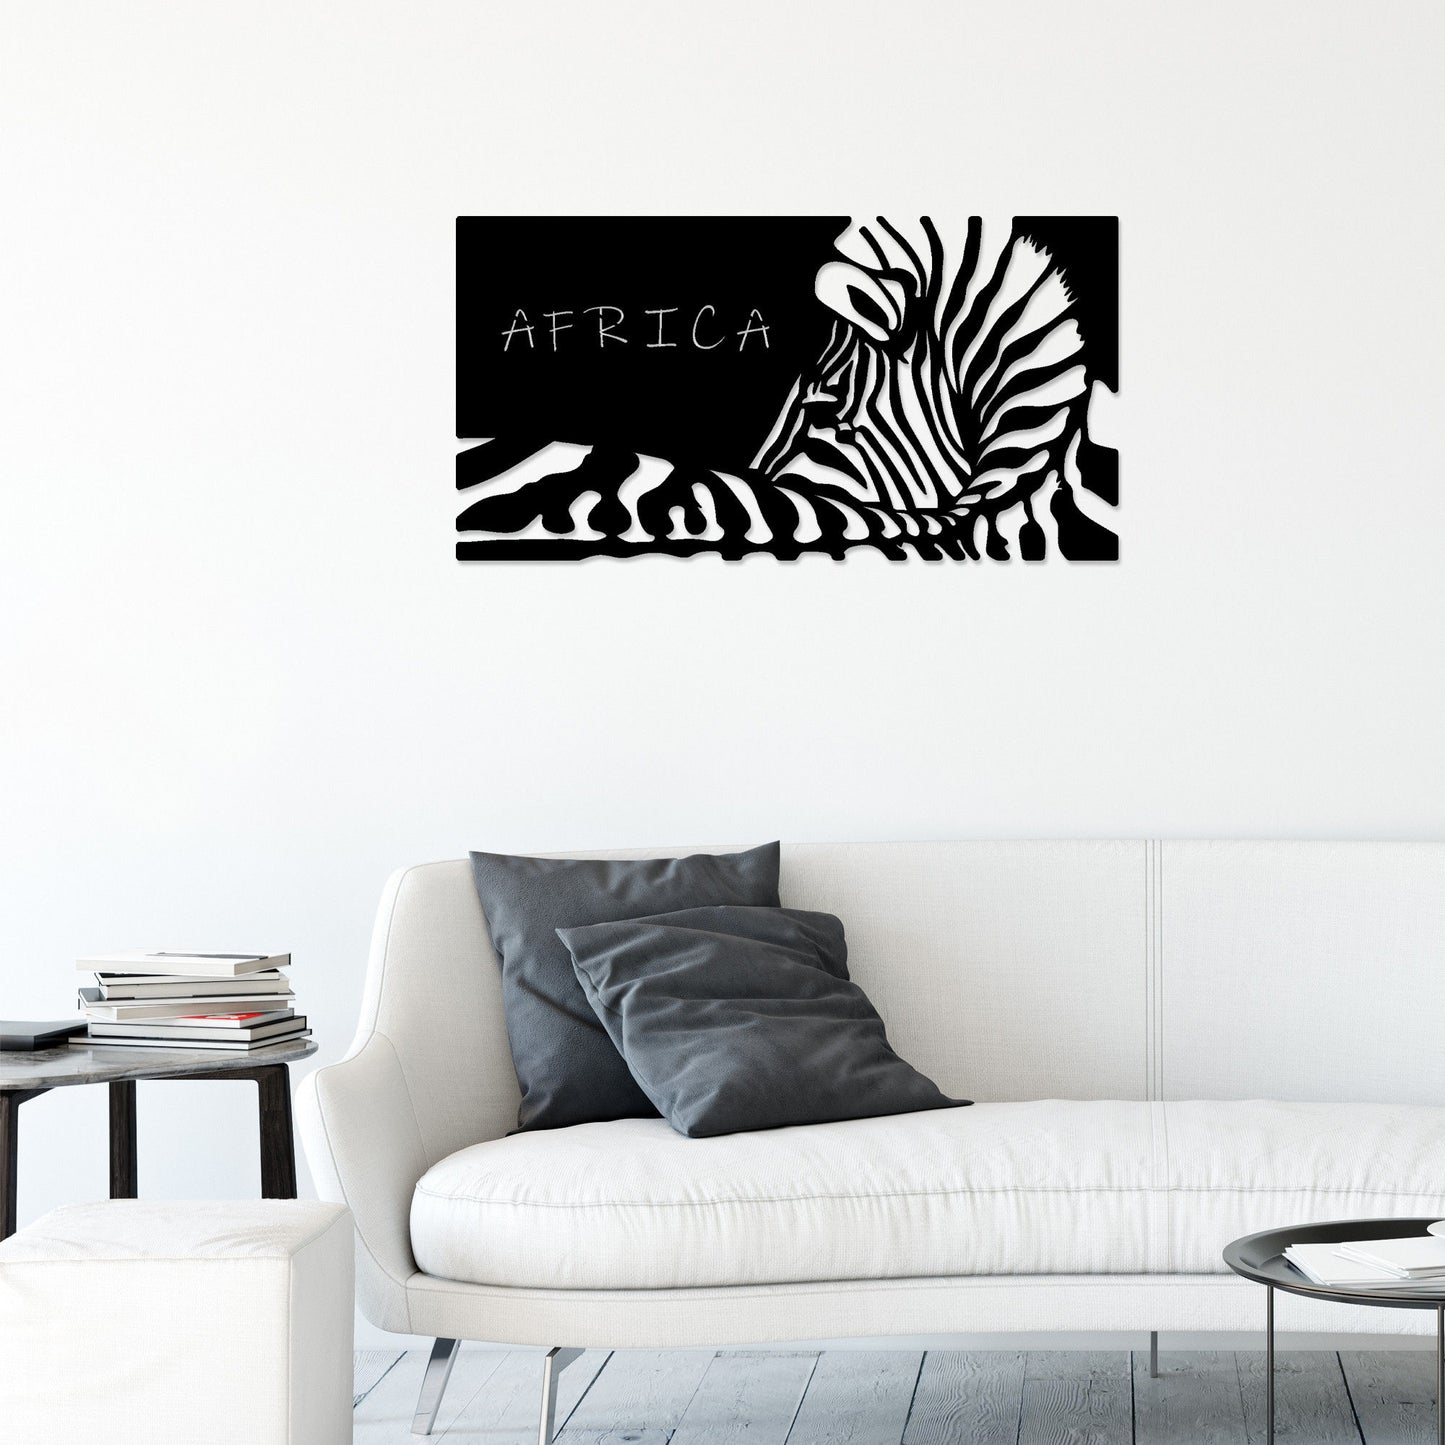 Africa - Decorative Metal Wall Accessory